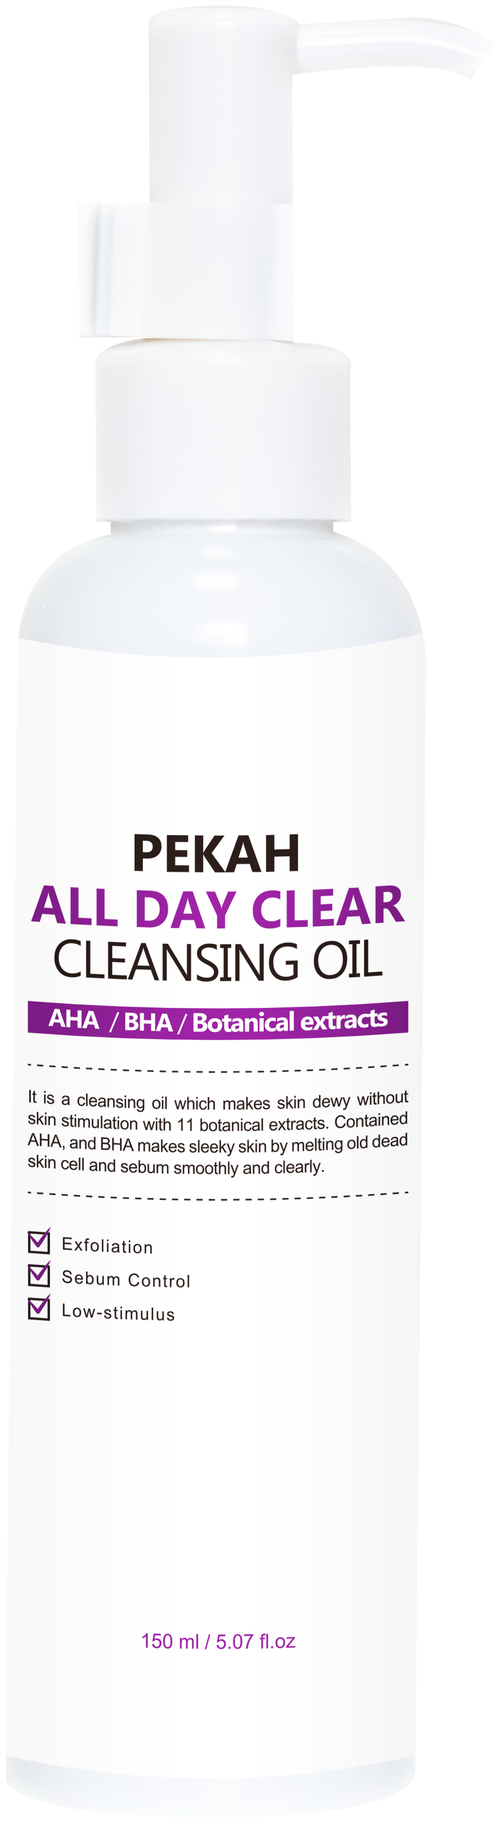 Pekah гидрофильное масло All Day Clear Cleansing Oil, 150 мл, 150 г